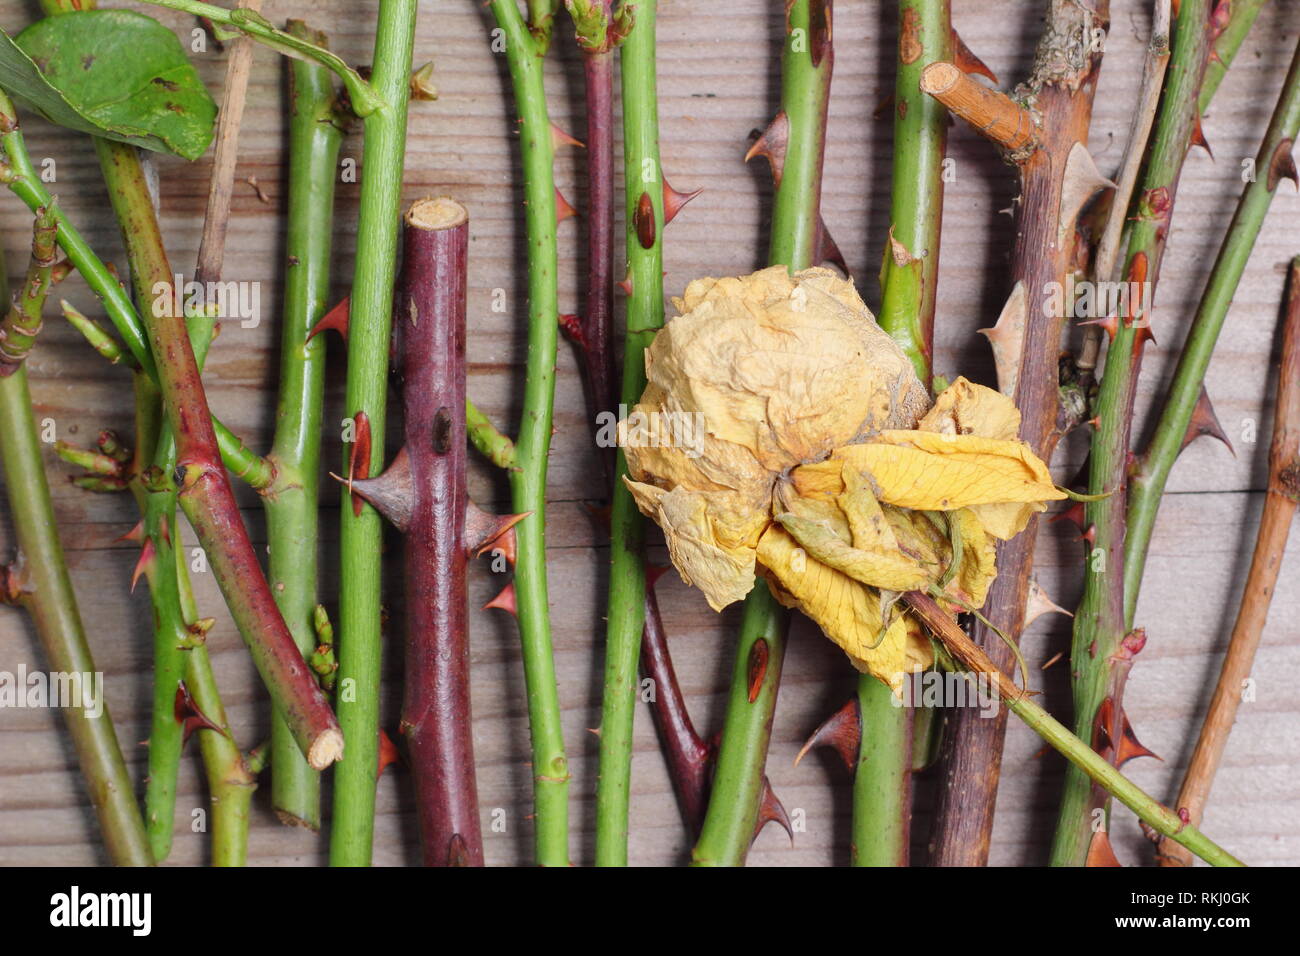 Rosa. Details of rose prunings clippings in winter, UK Stock Photo